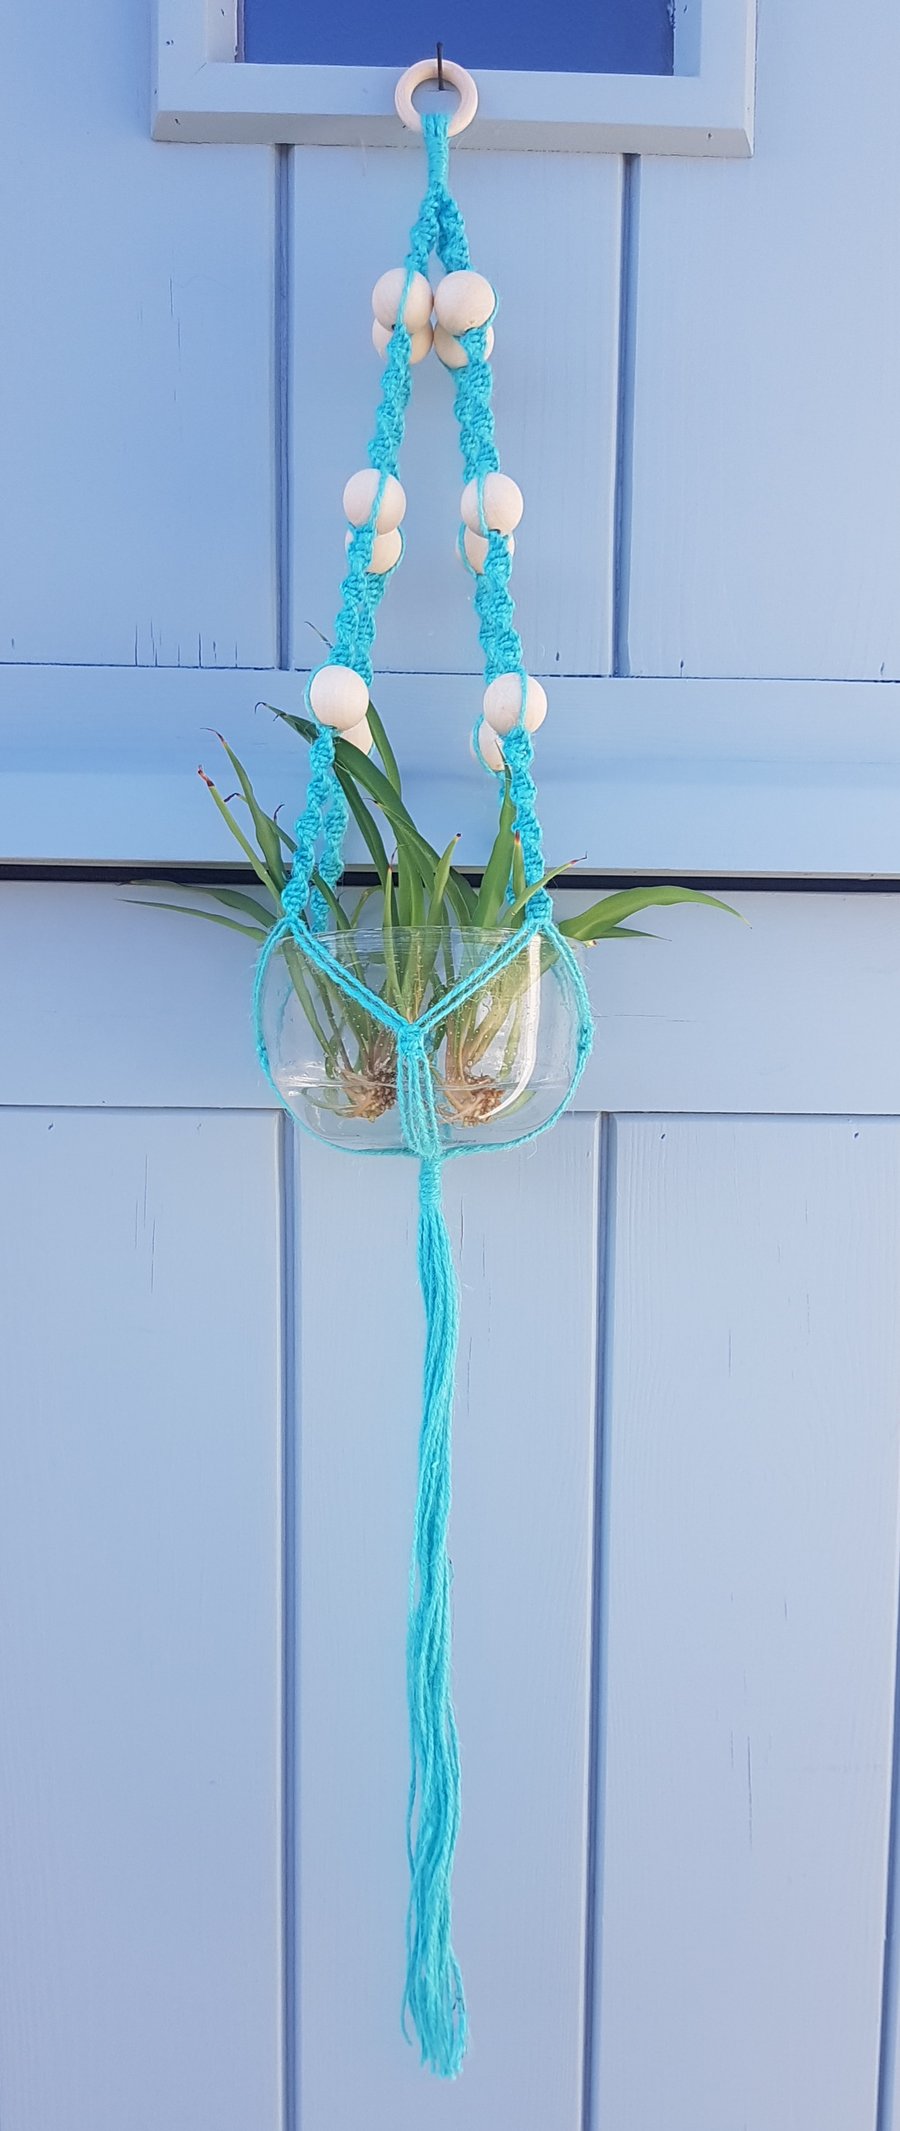 Seconds Sunday Rustic macramé plant holder hanging basket with wooden beads